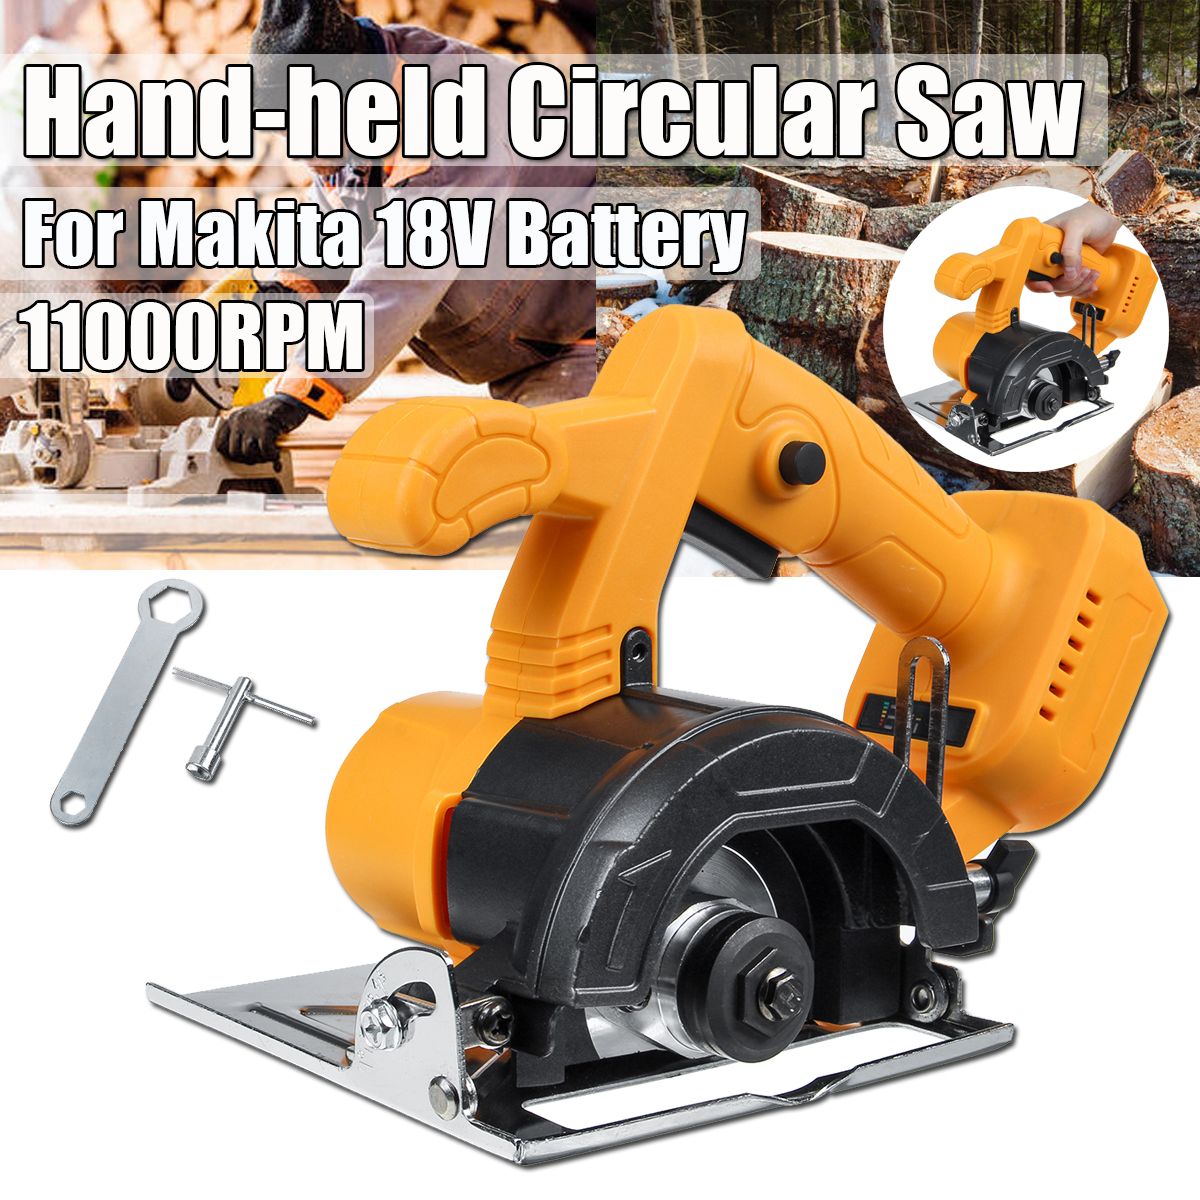 Electric-Circular-Saw-11000RPM-Multifunction-Cutting-For-Makita-18V-Battery-1682263